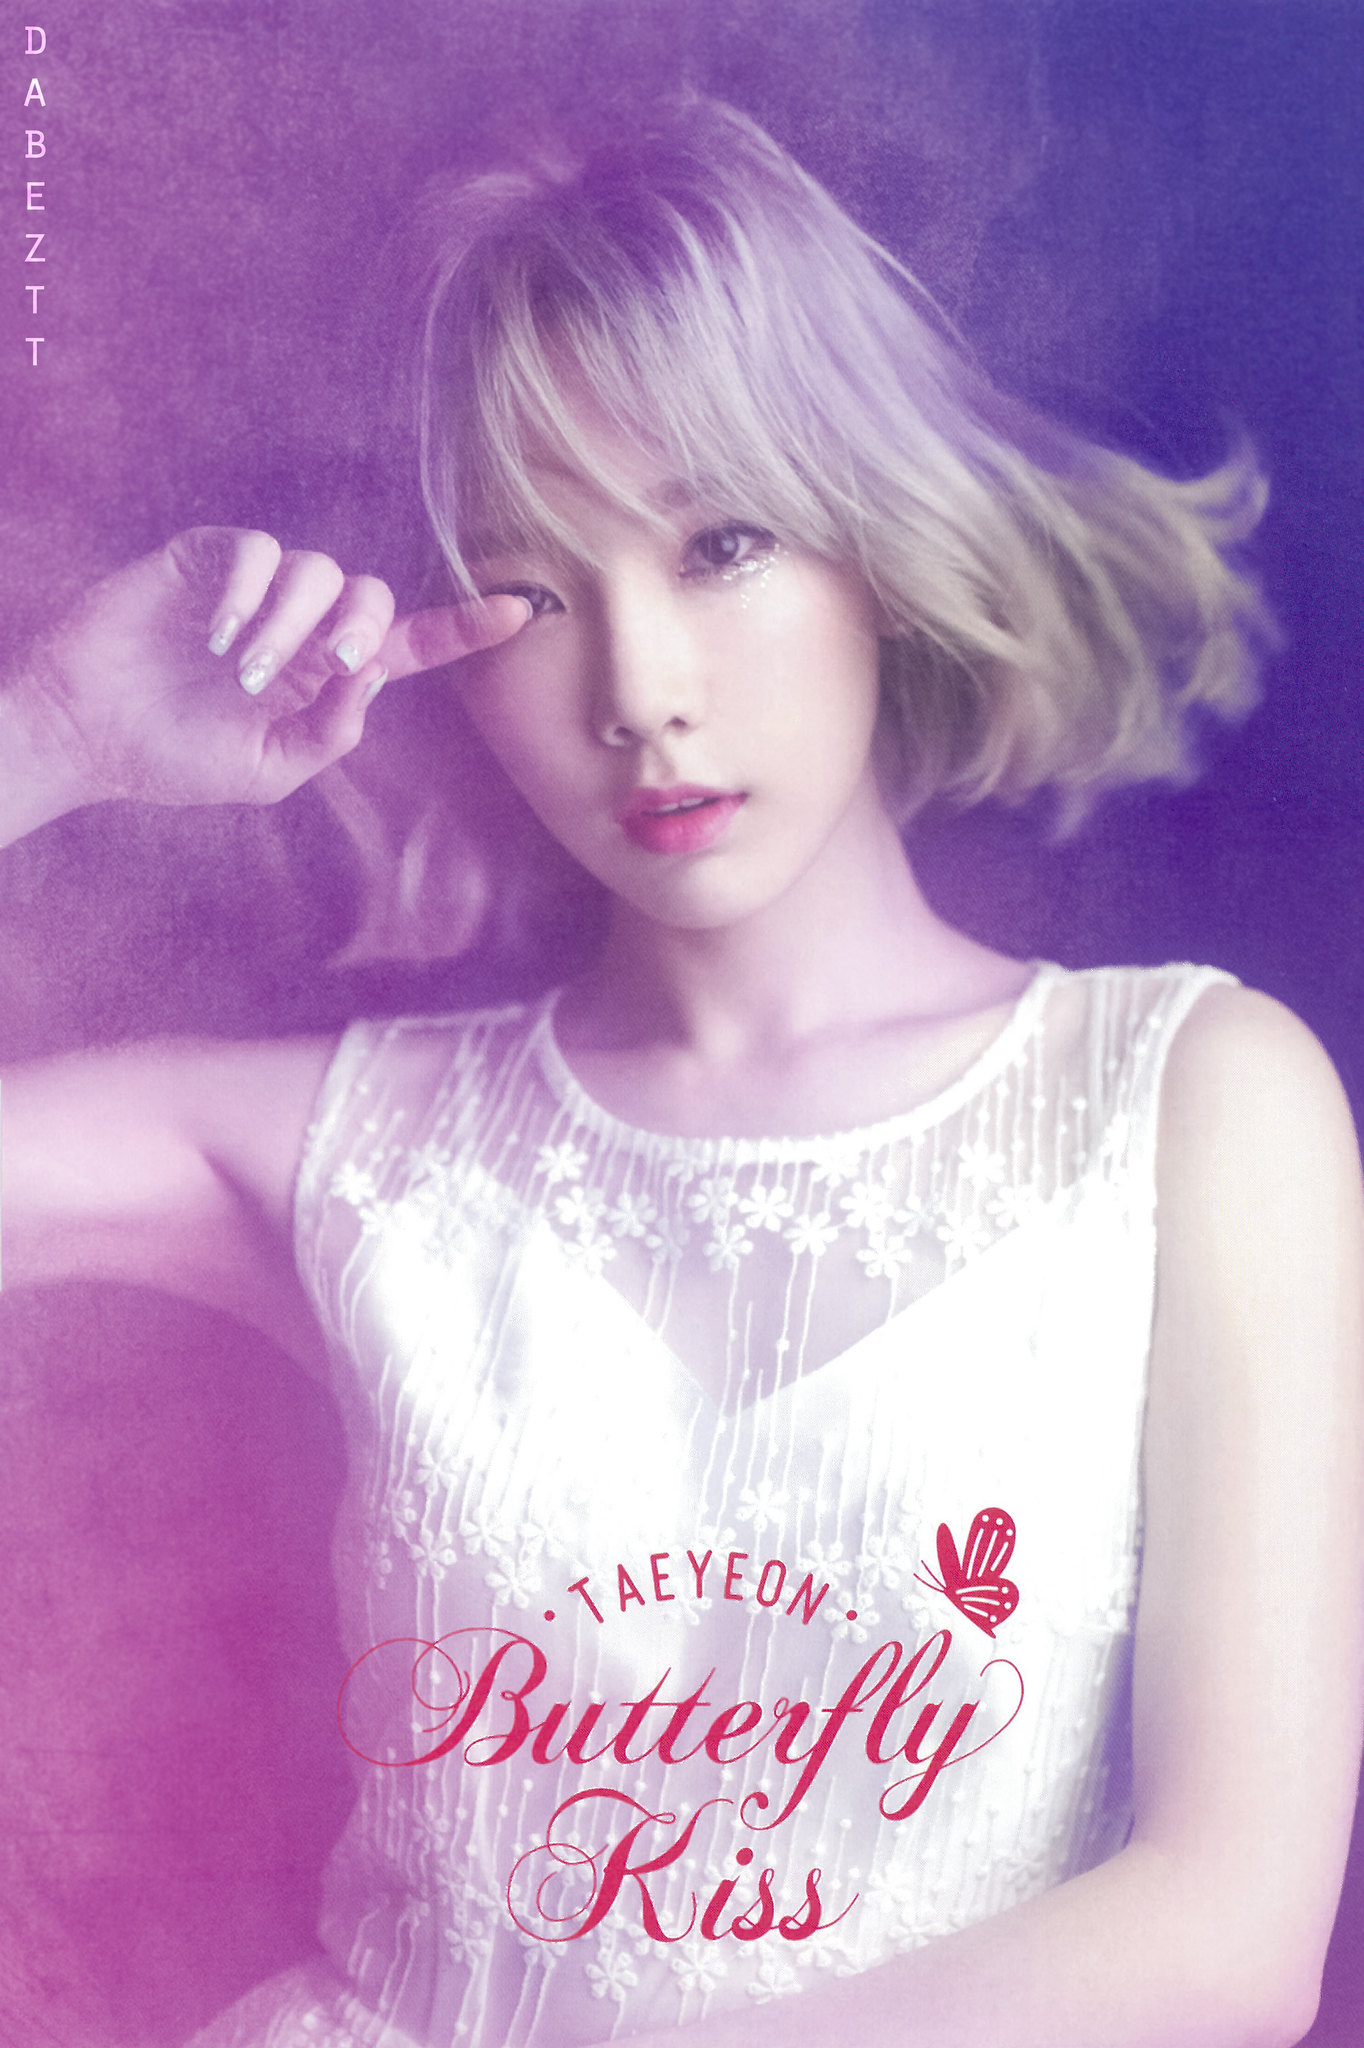 [PIC][24-05-2016]TaeYeon @ Solo Concert “Butterfly Kiss” 27660028244_eedd967d2a_k